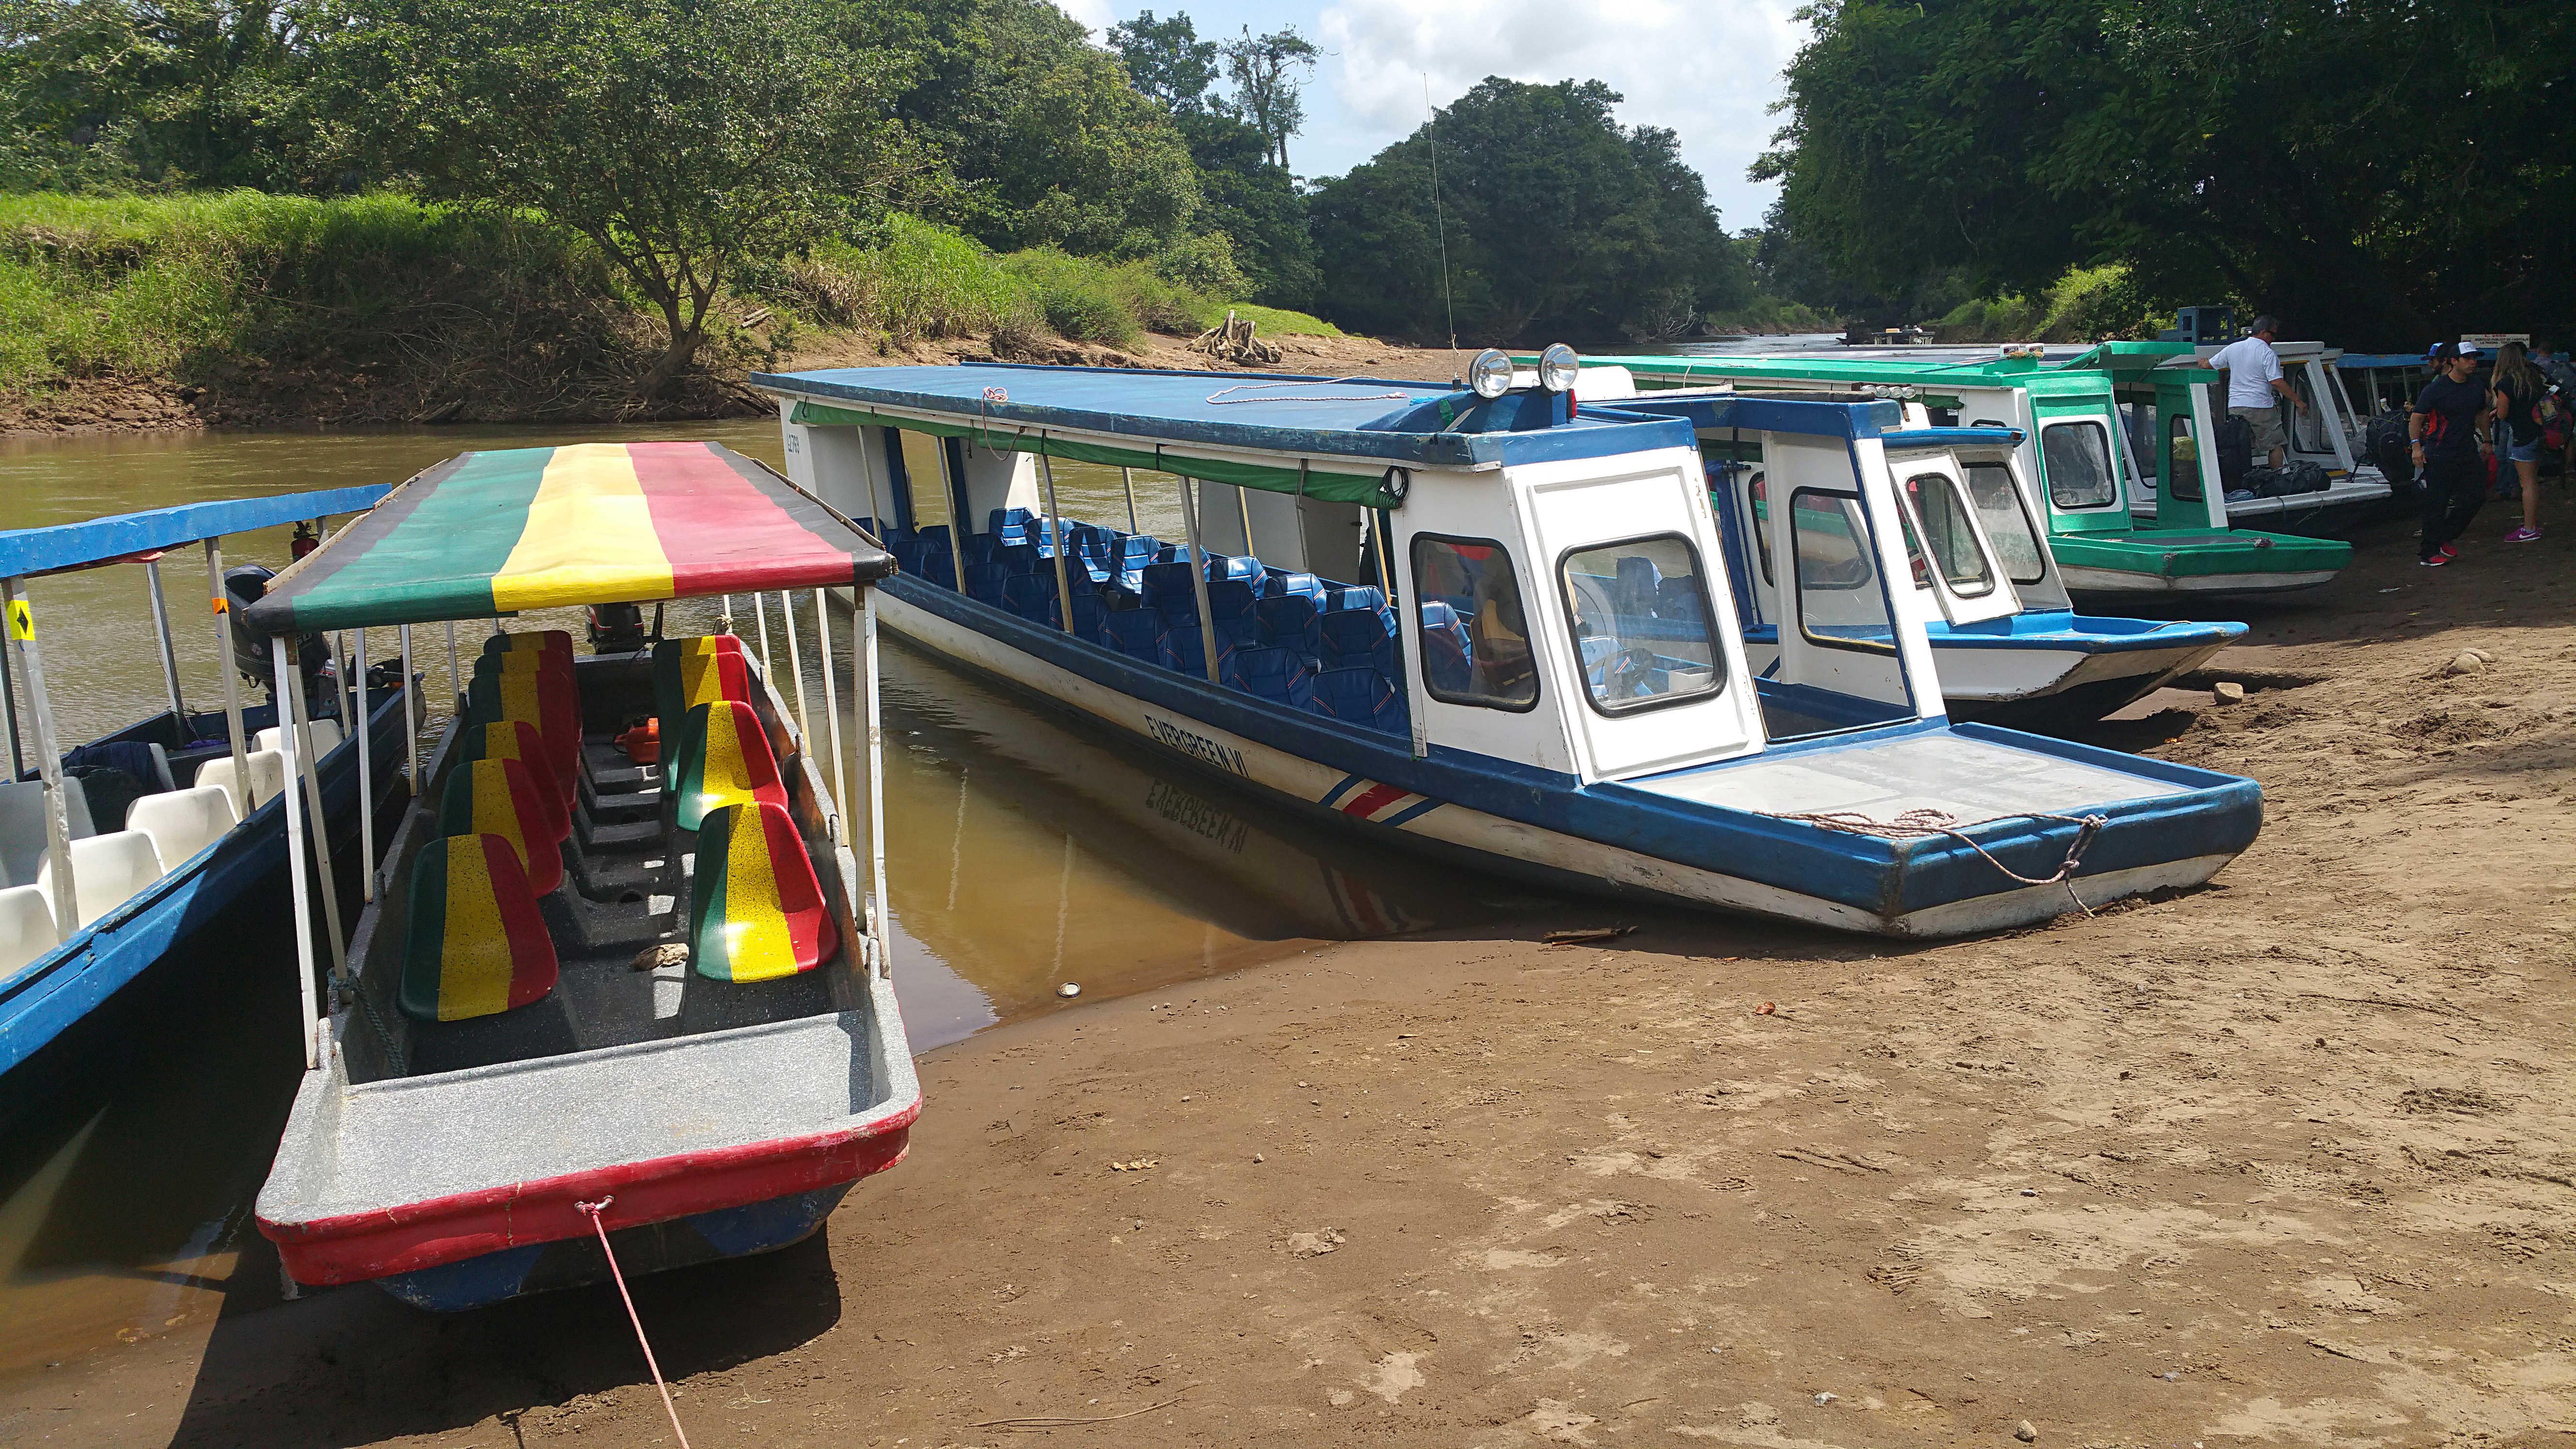 Water taxis transport tourists and locals to Tortuguero. Image by Bailey Johnson / Lonely Planet